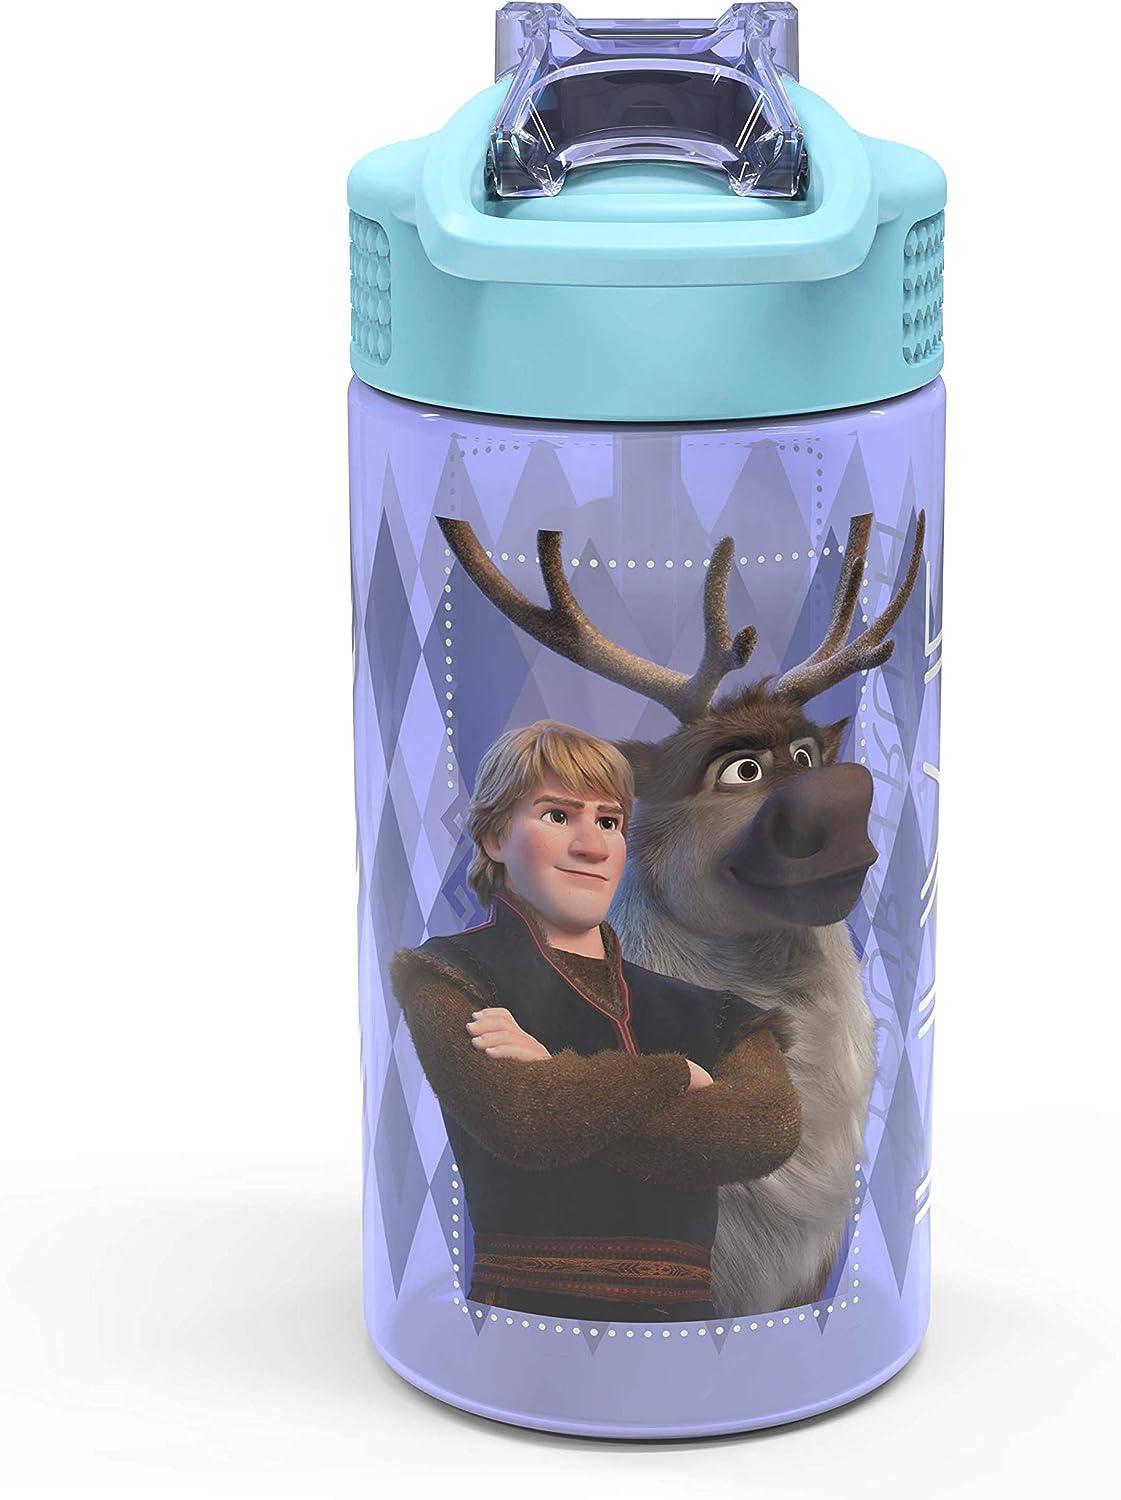 Zak Designs 16 oz Blue and Purple Anna and Elsa Plastic Water Bottles with Flip-Top Lid (2 Pack)